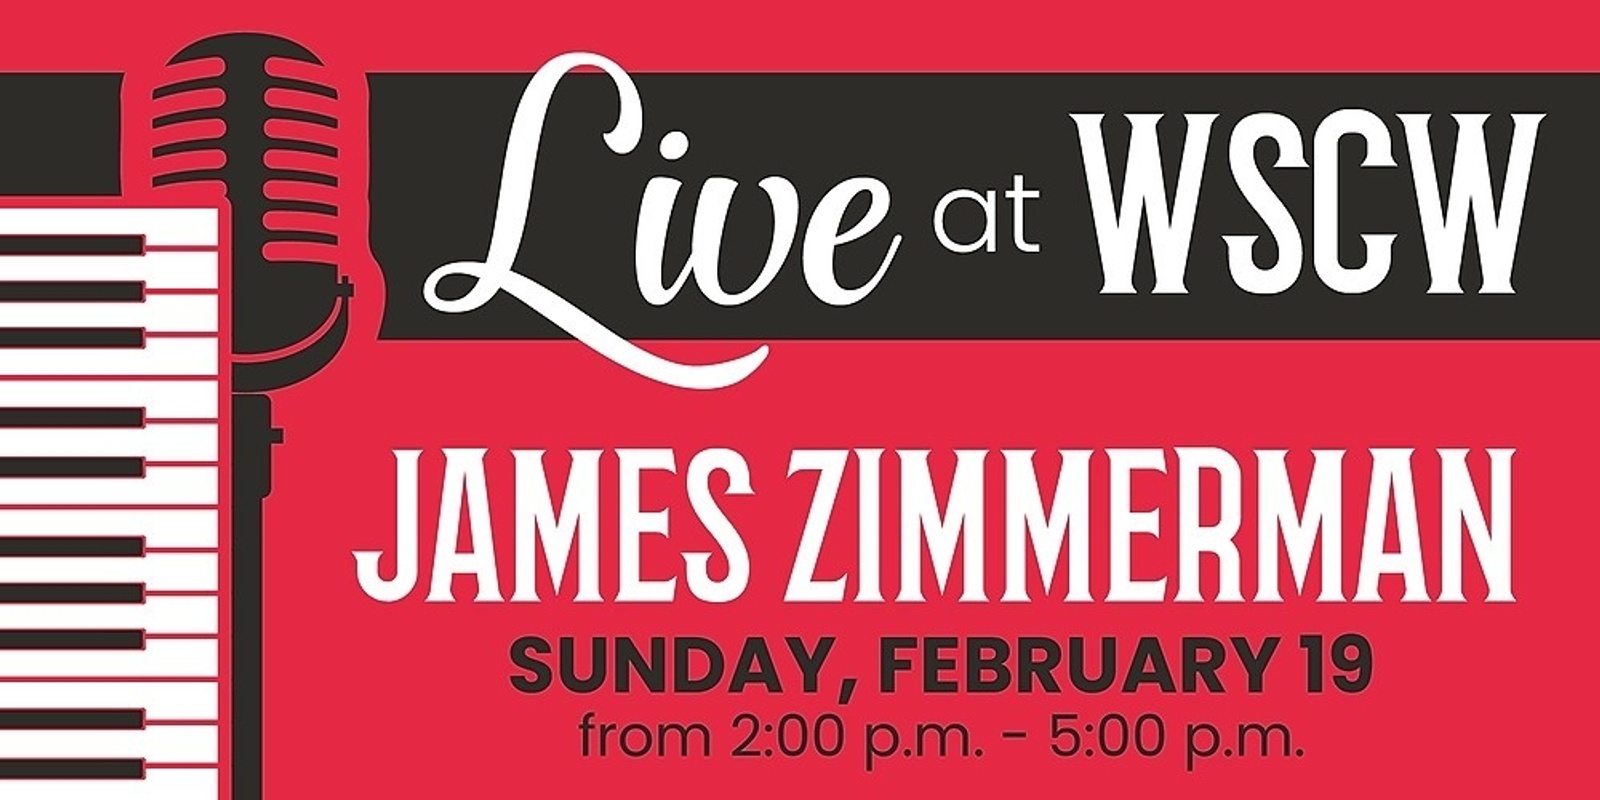 Banner image for James Zimmerman Live at WSCW February 19